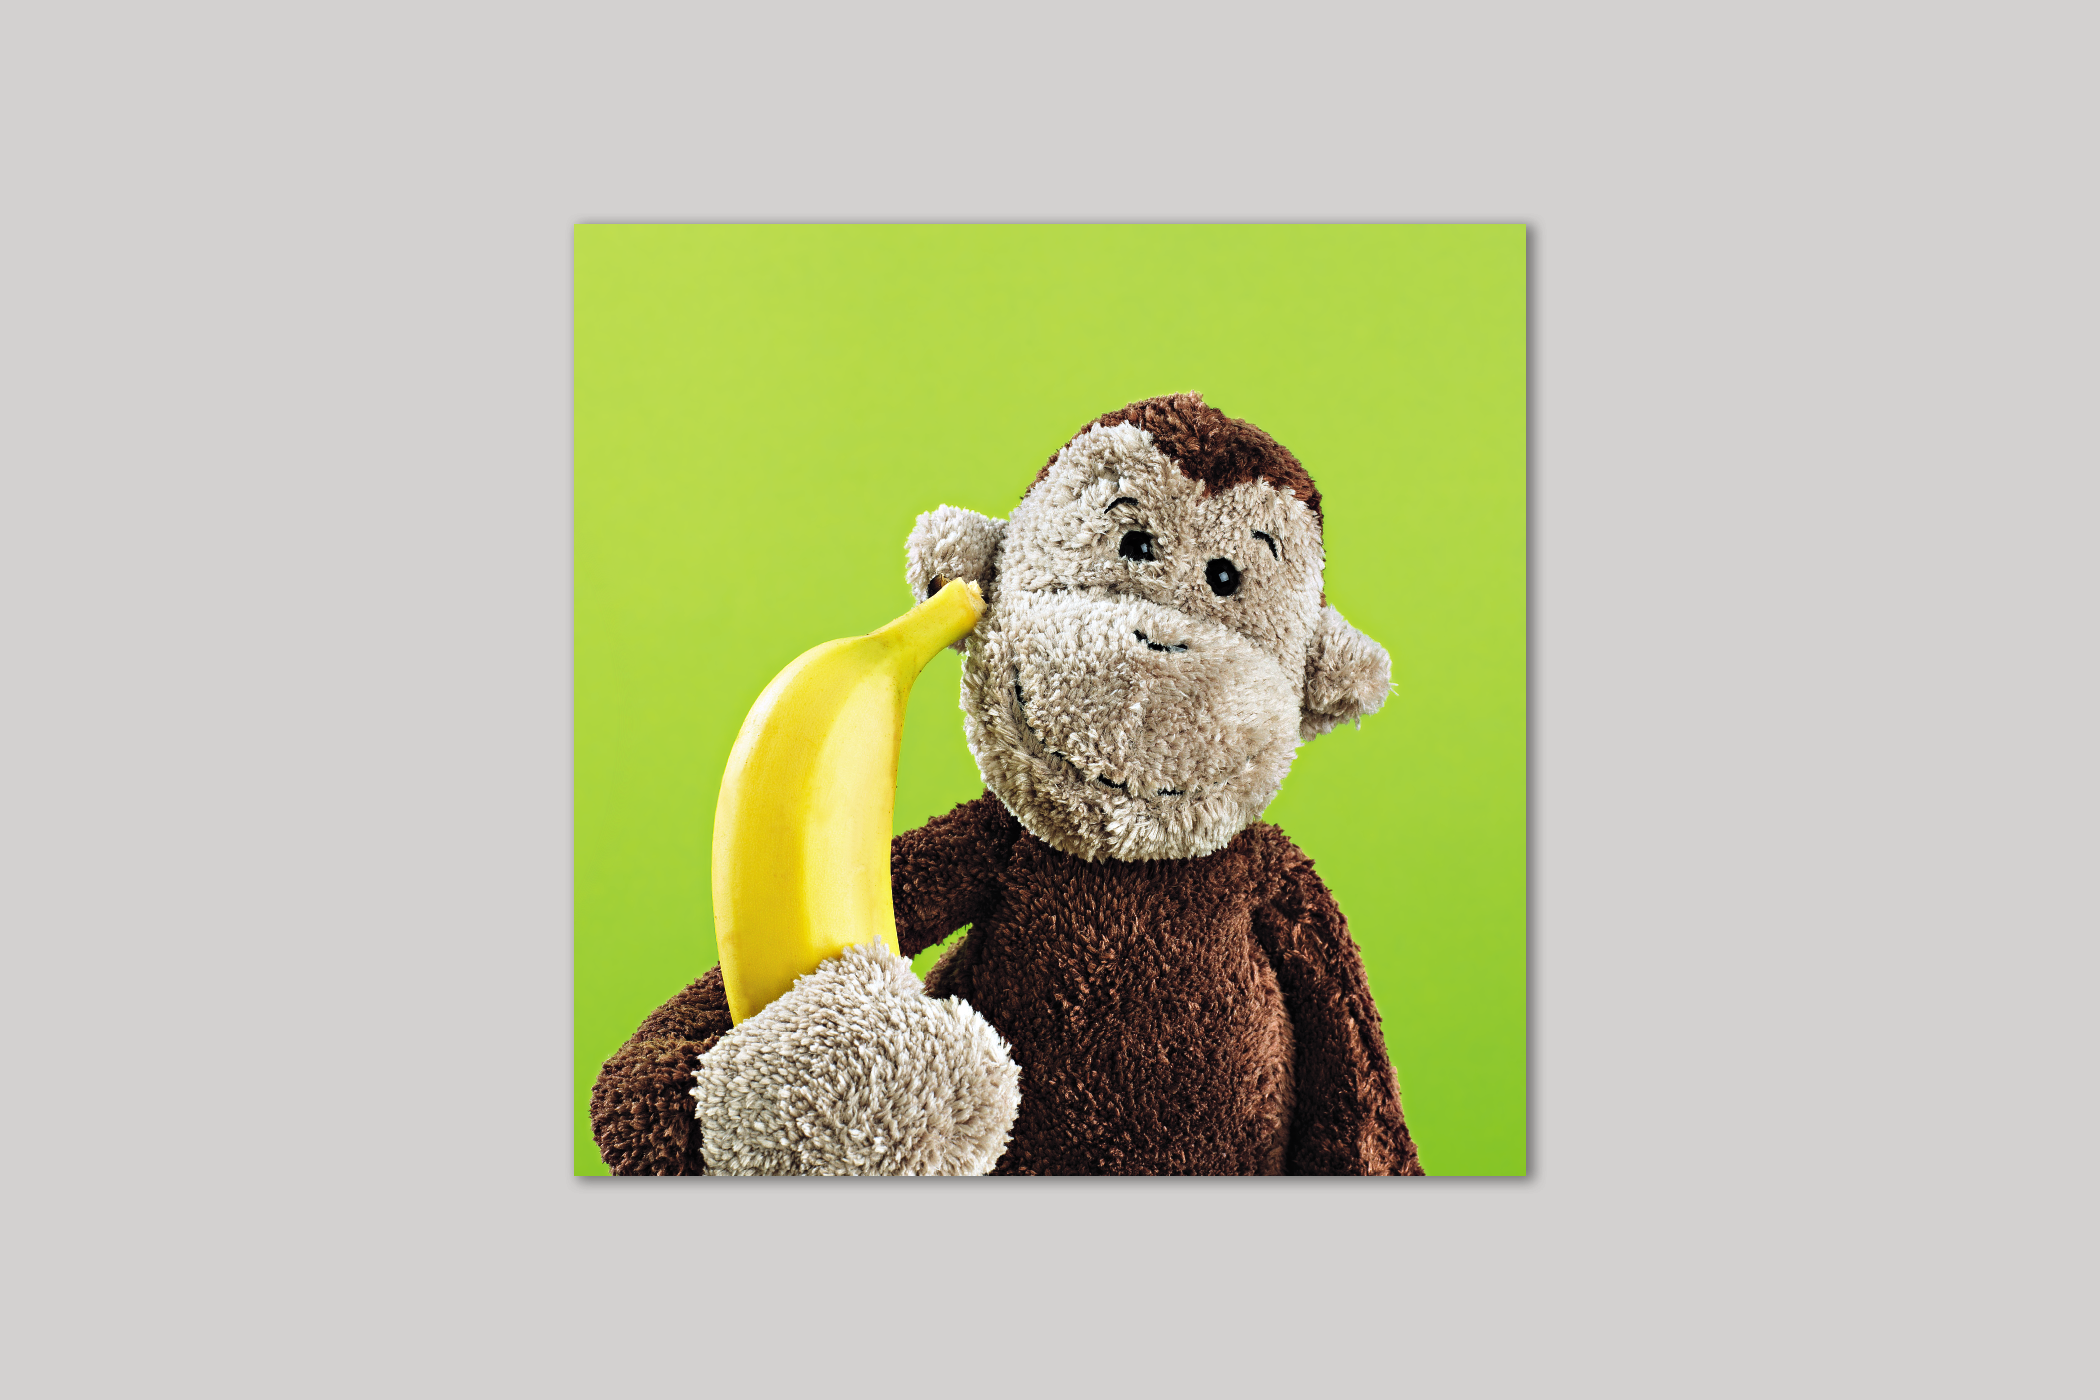 Cheeky Monkey from Exposure range of photographic cards by Icon.